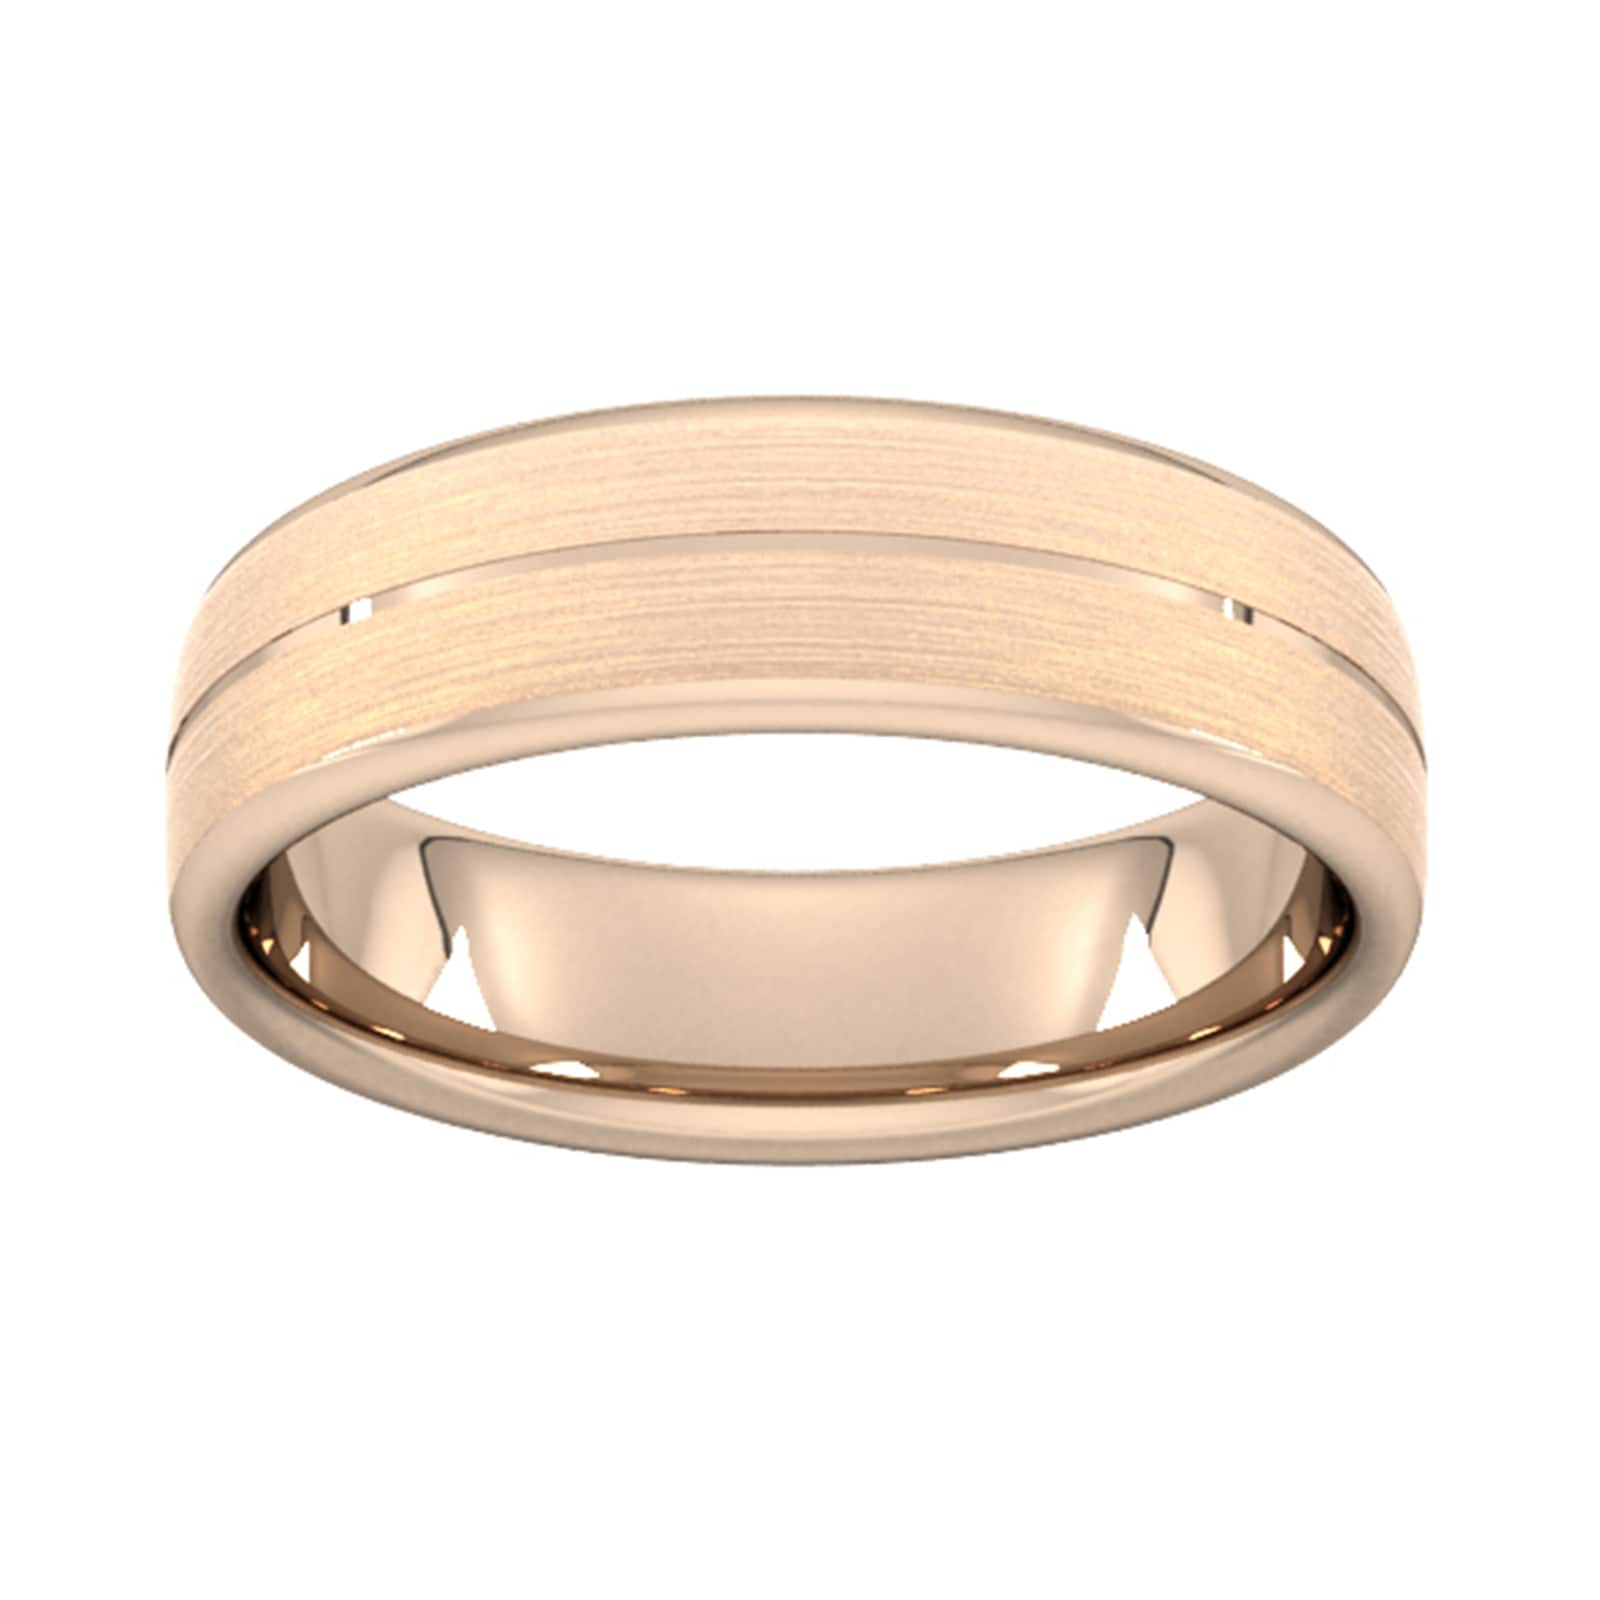 6mm Flat Court Heavy Centre Groove With Chamfered Edge Wedding Ring In 9 Carat Rose Gold - Ring Size W